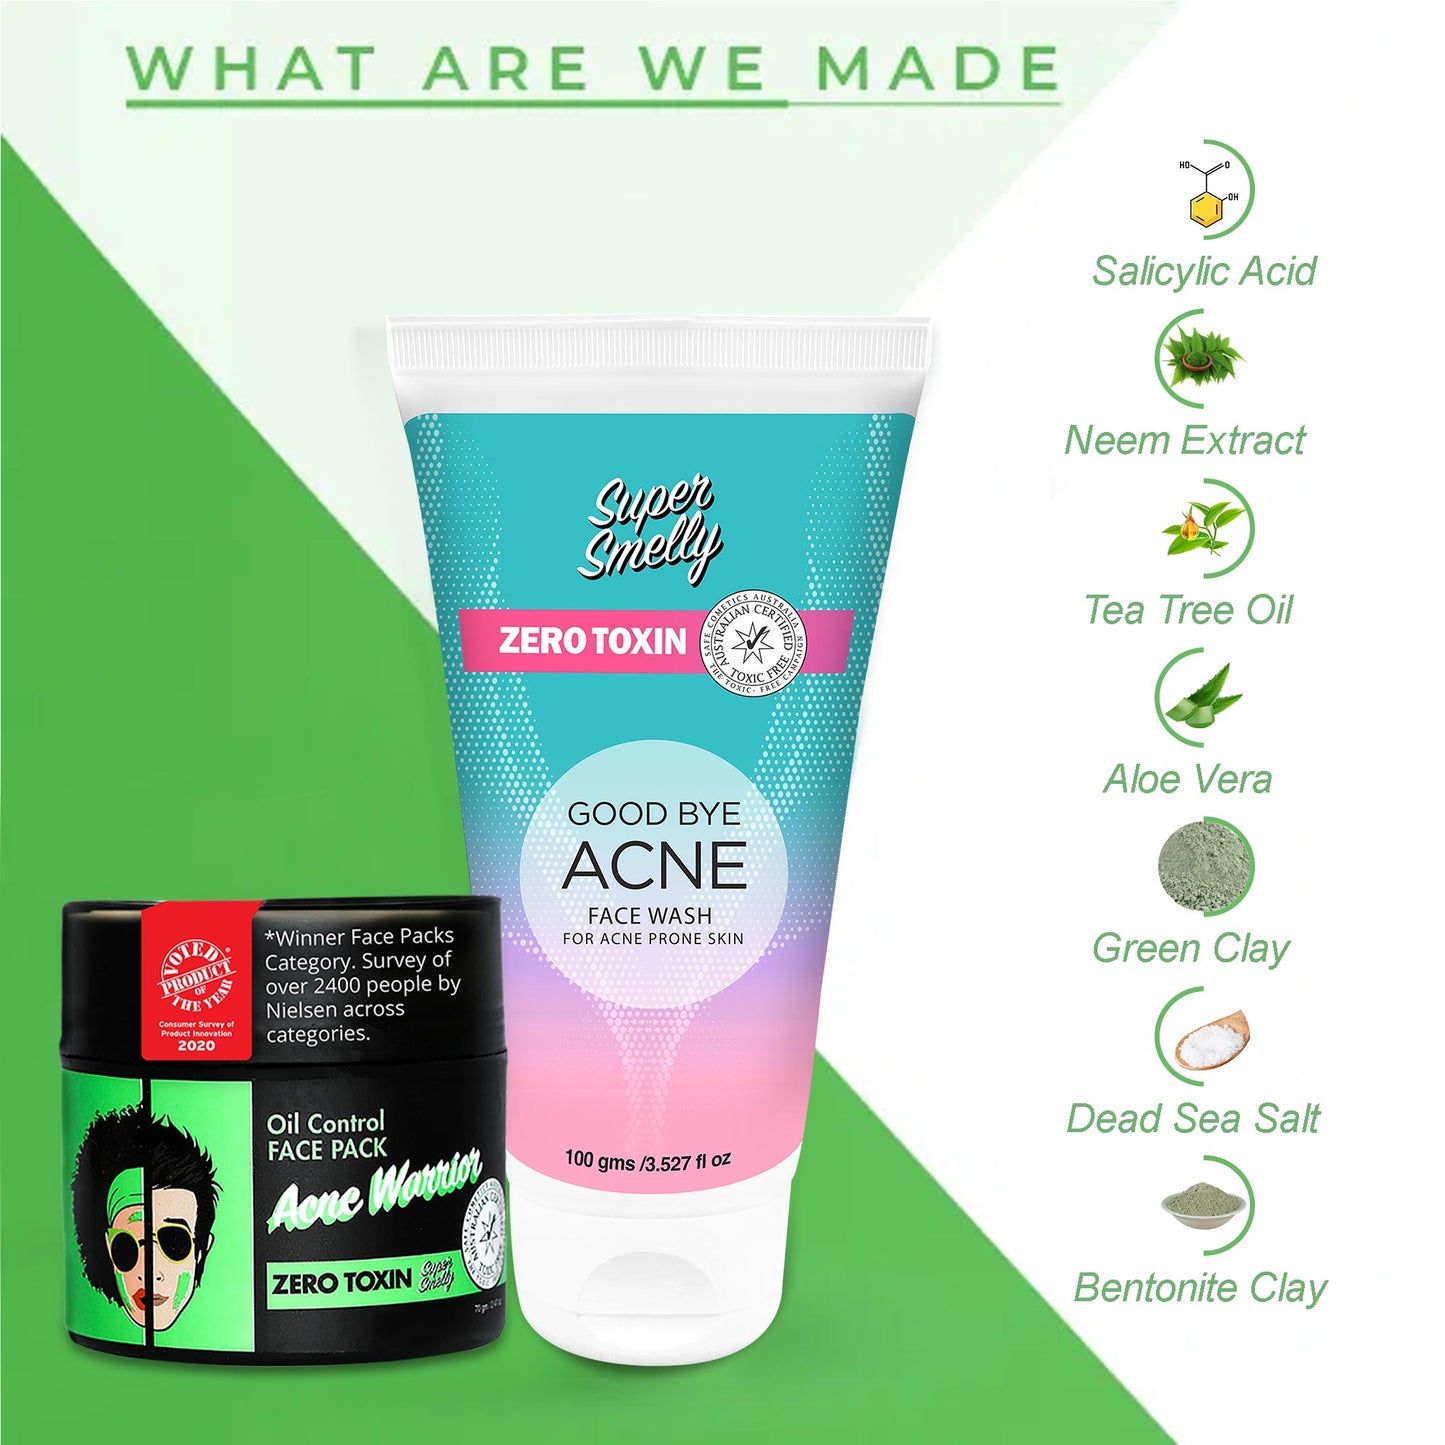 Goodbye Acne Face wash and Acne Warrior Face Pack Combo